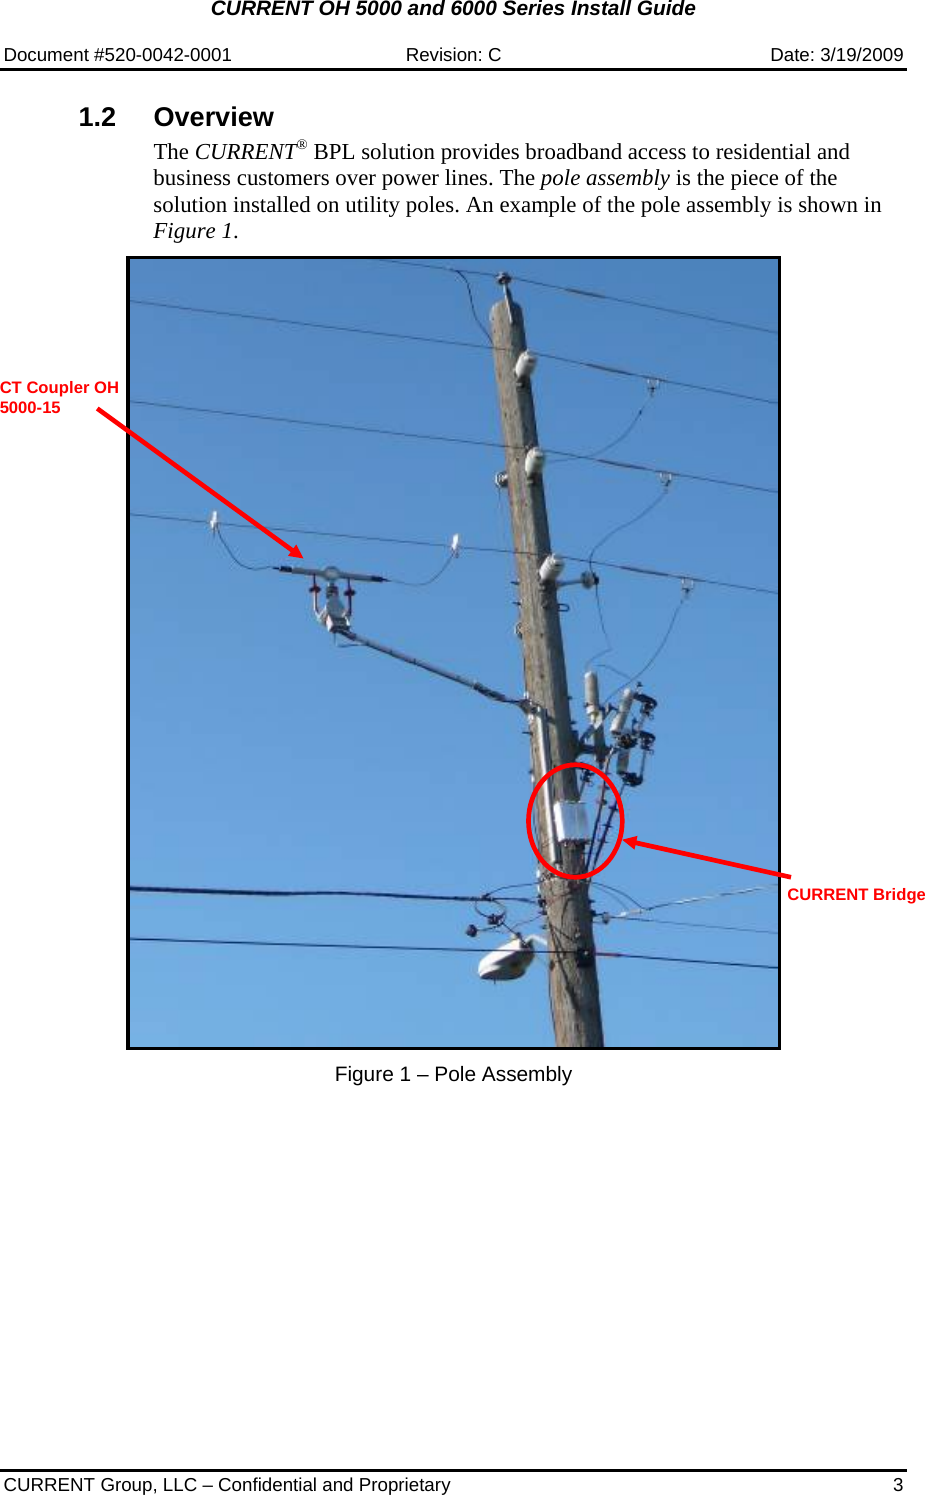 CURRENT OH 5000 and 6000 Series Install Guide  Document #520-0042-0001  Revision: C  Date: 3/19/2009  CURRENT Group, LLC – Confidential and Proprietary  3 1.2 Overview The CURRENT® BPL solution provides broadband access to residential and business customers over power lines. The pole assembly is the piece of the solution installed on utility poles. An example of the pole assembly is shown in Figure 1.    Figure 1 – Pole Assembly  CURRENT Bridge CT Coupler OH 5000-15 